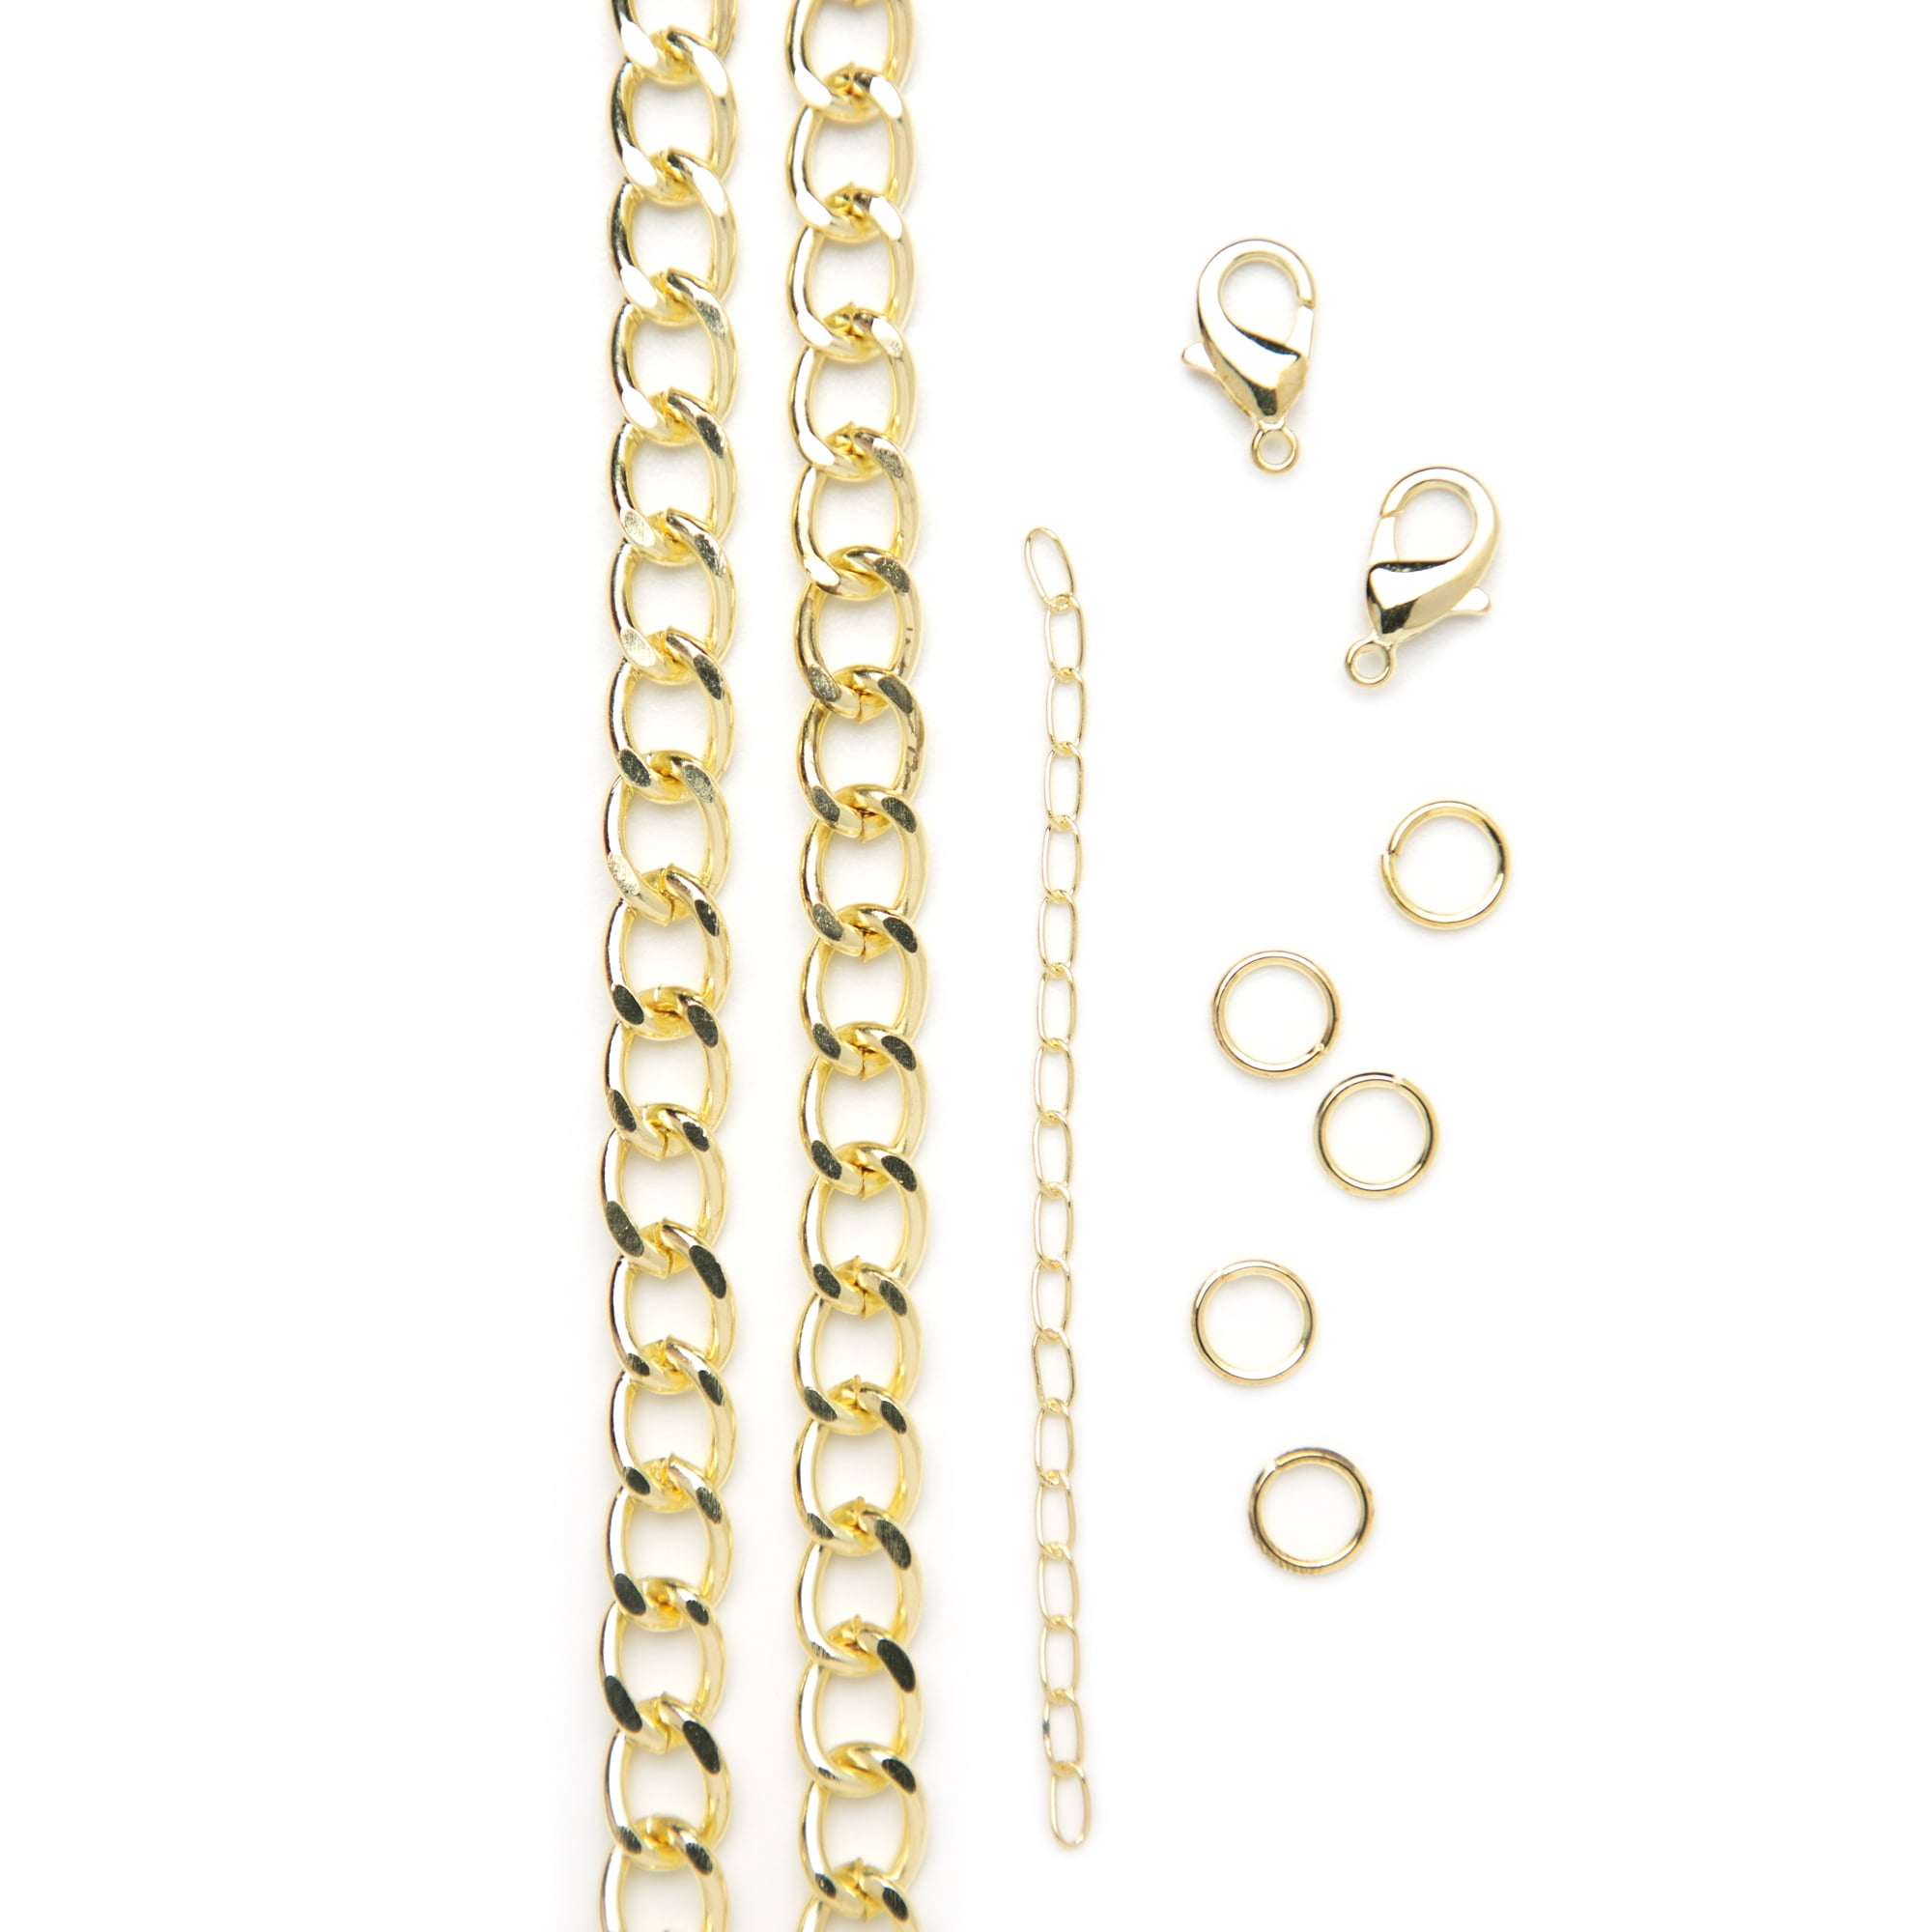 29mm Wearable 14k Gold Filled Nose Chain with White Cat Eye beads